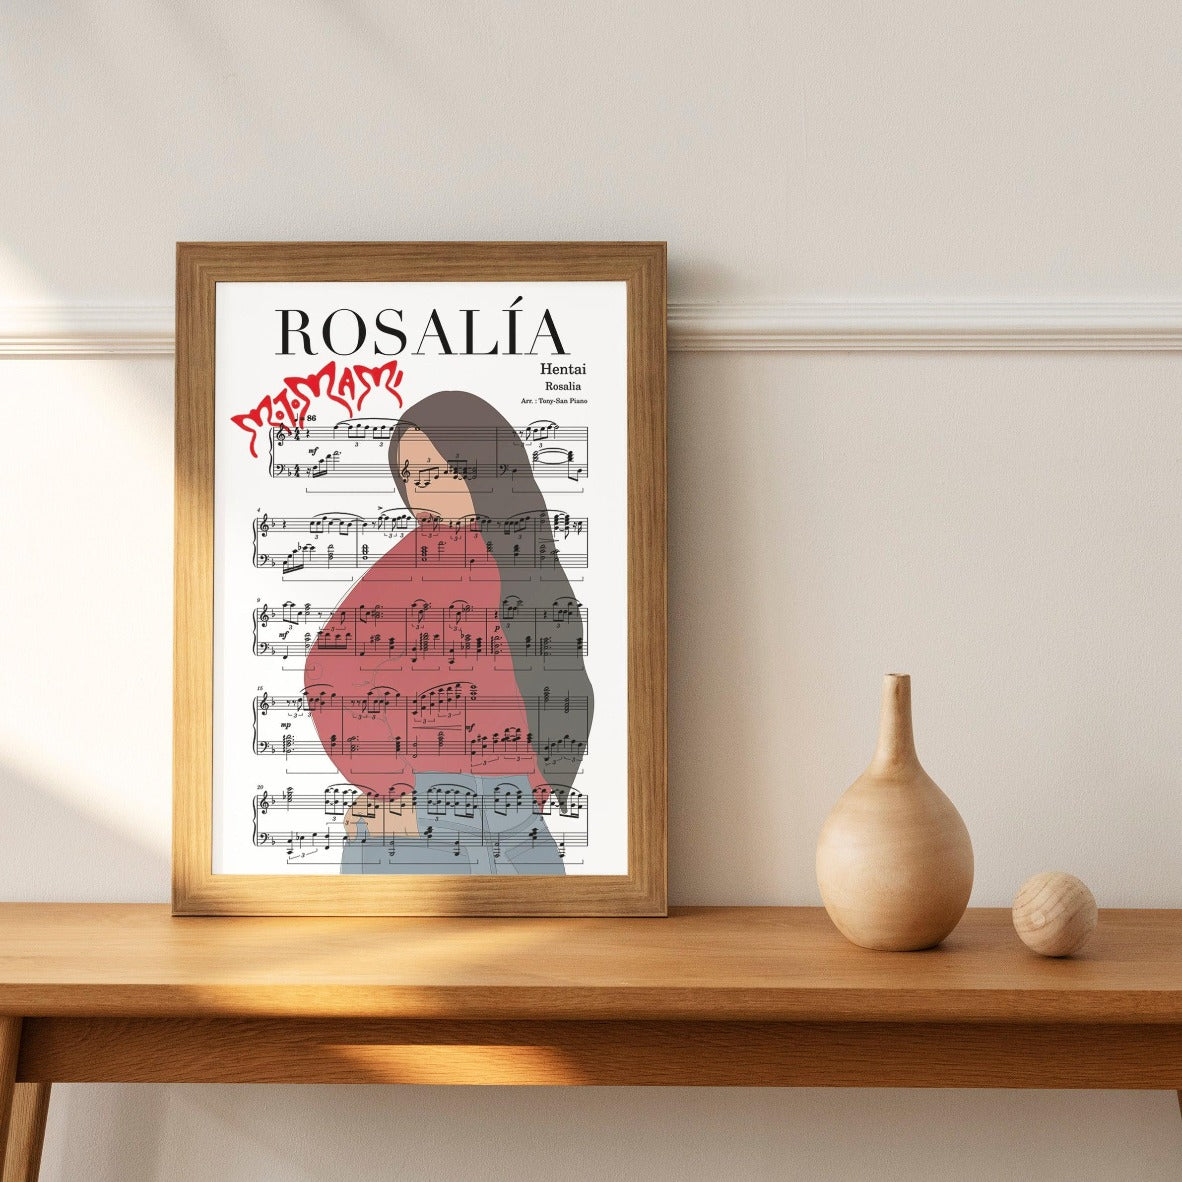 Transform any room into a musical paradise with the Rosalia - Hentai Poster. Fusing a blend of music, art and personalized song lyrics, this poster is the perfect way to celebrate your favorite song. With the premium-quality printing of this poster, the crisp and vibrant colors will allow you to experience each beat and lyric in all its glory. Whether it be for yourself or as a unique gift for someone special, let this poster fill your home with Rosalia's Hentai beats.